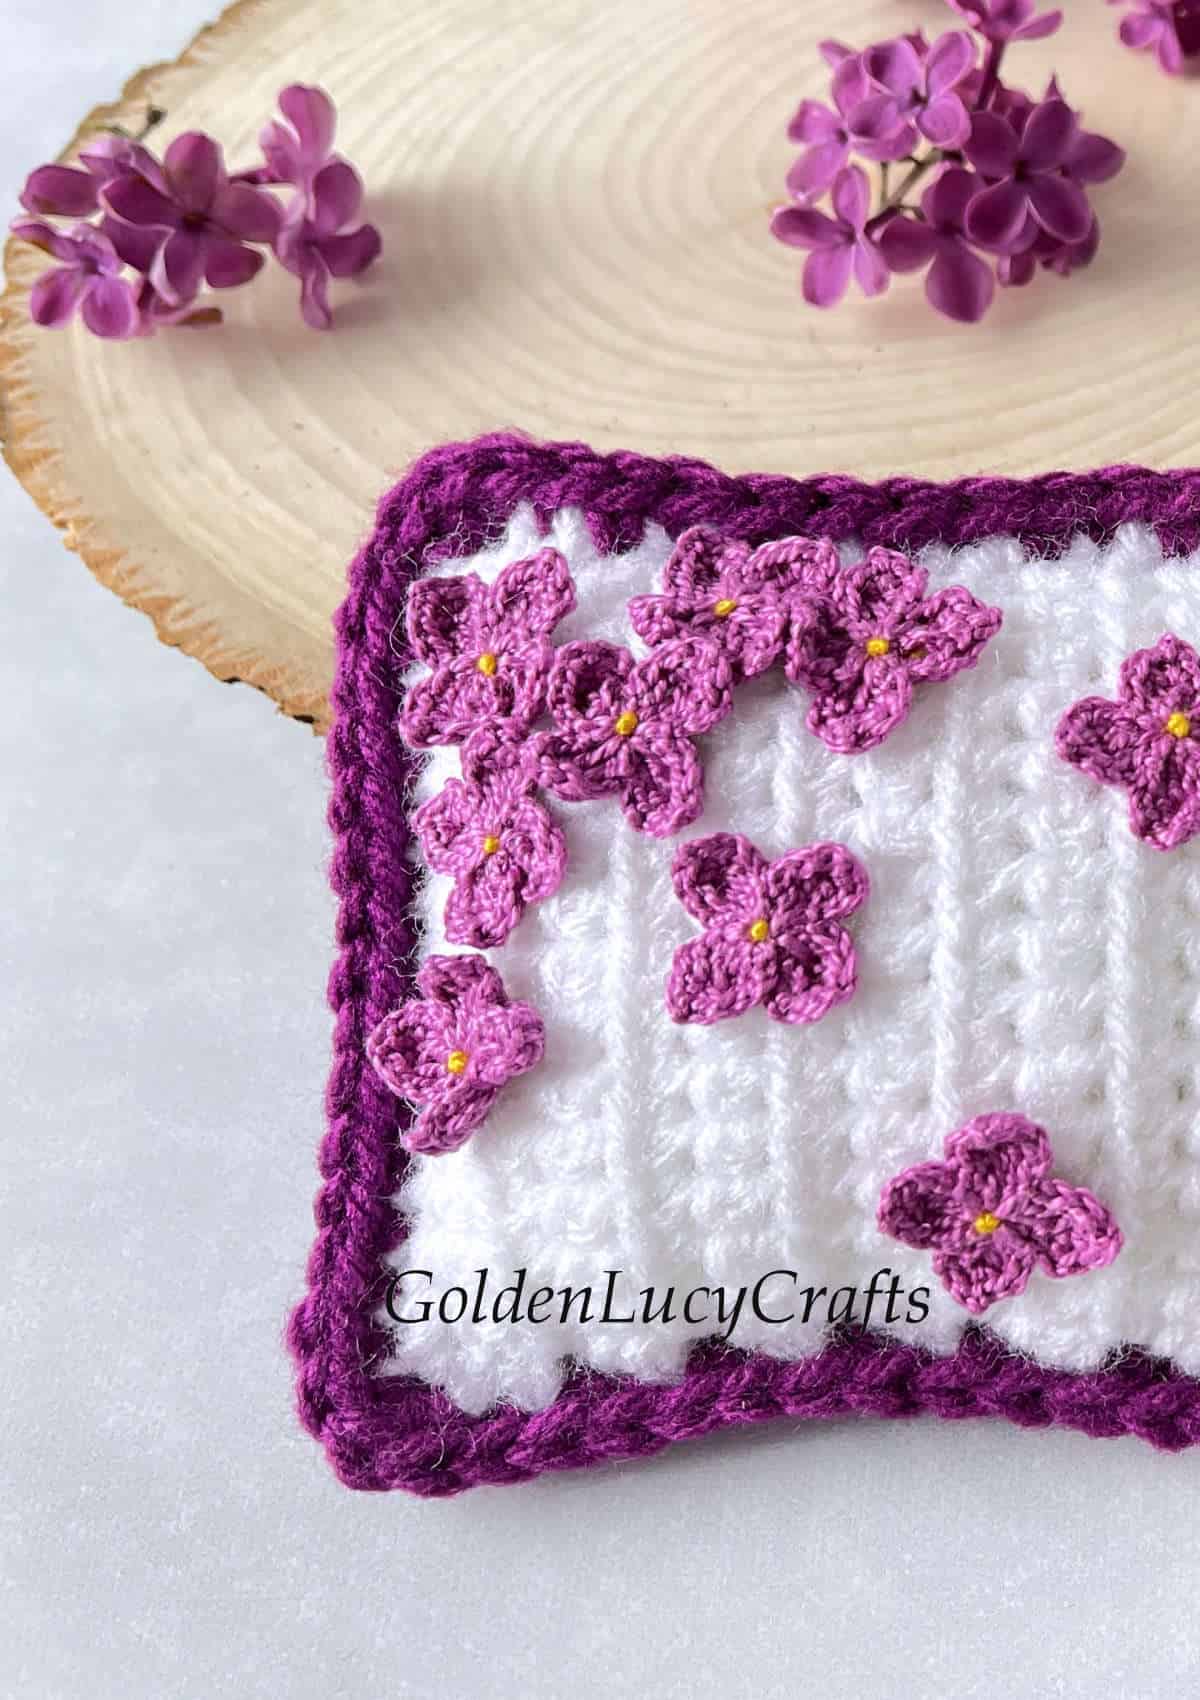 Crochet decorative mini pillow embellished with crocheted lilac flowers close up picture.